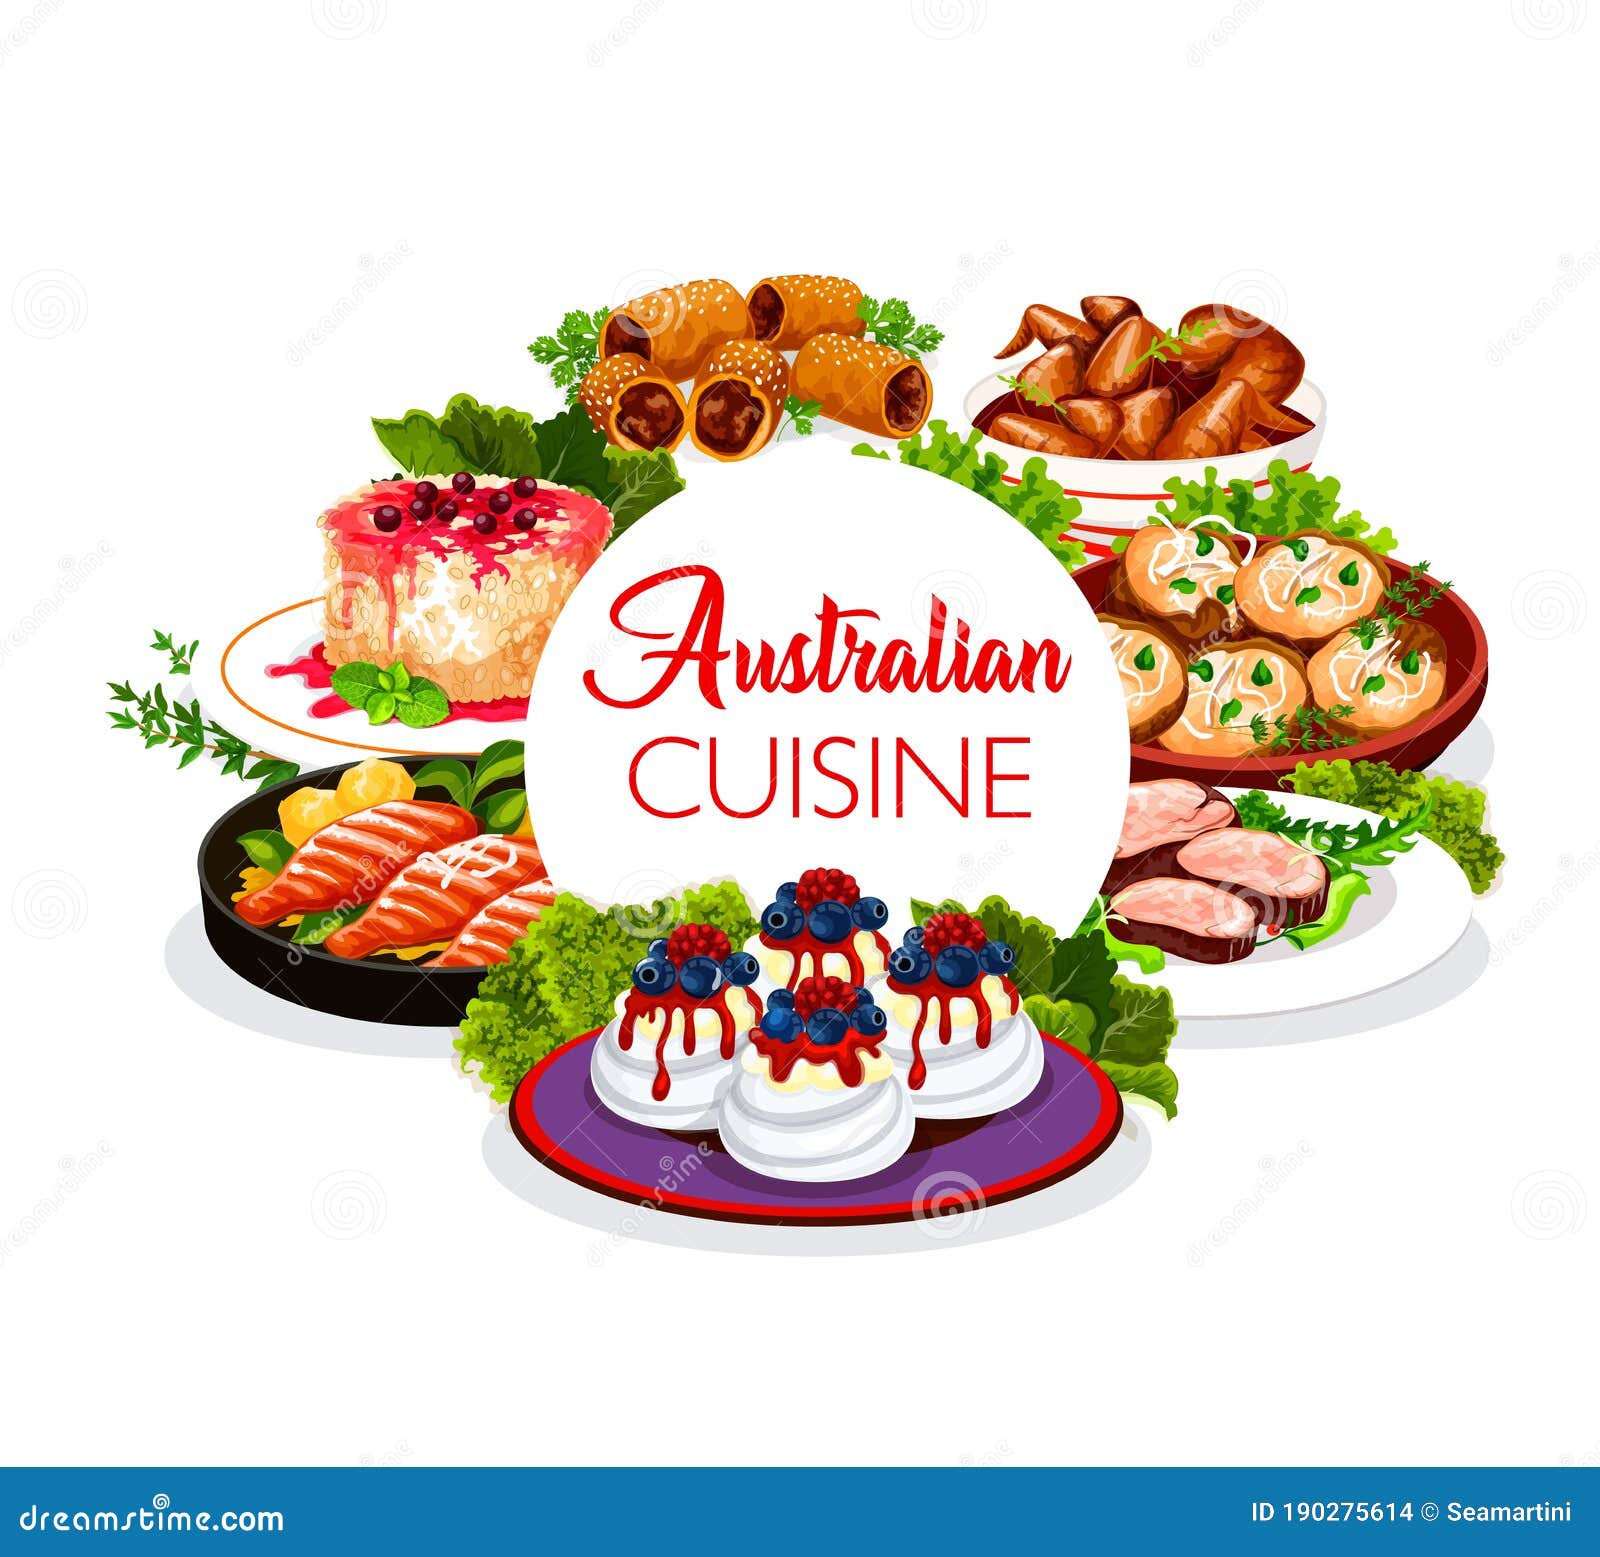 Australian Cuisine Food Dishes, Traditional Meals Stock Illustration of cuisine, 190275614